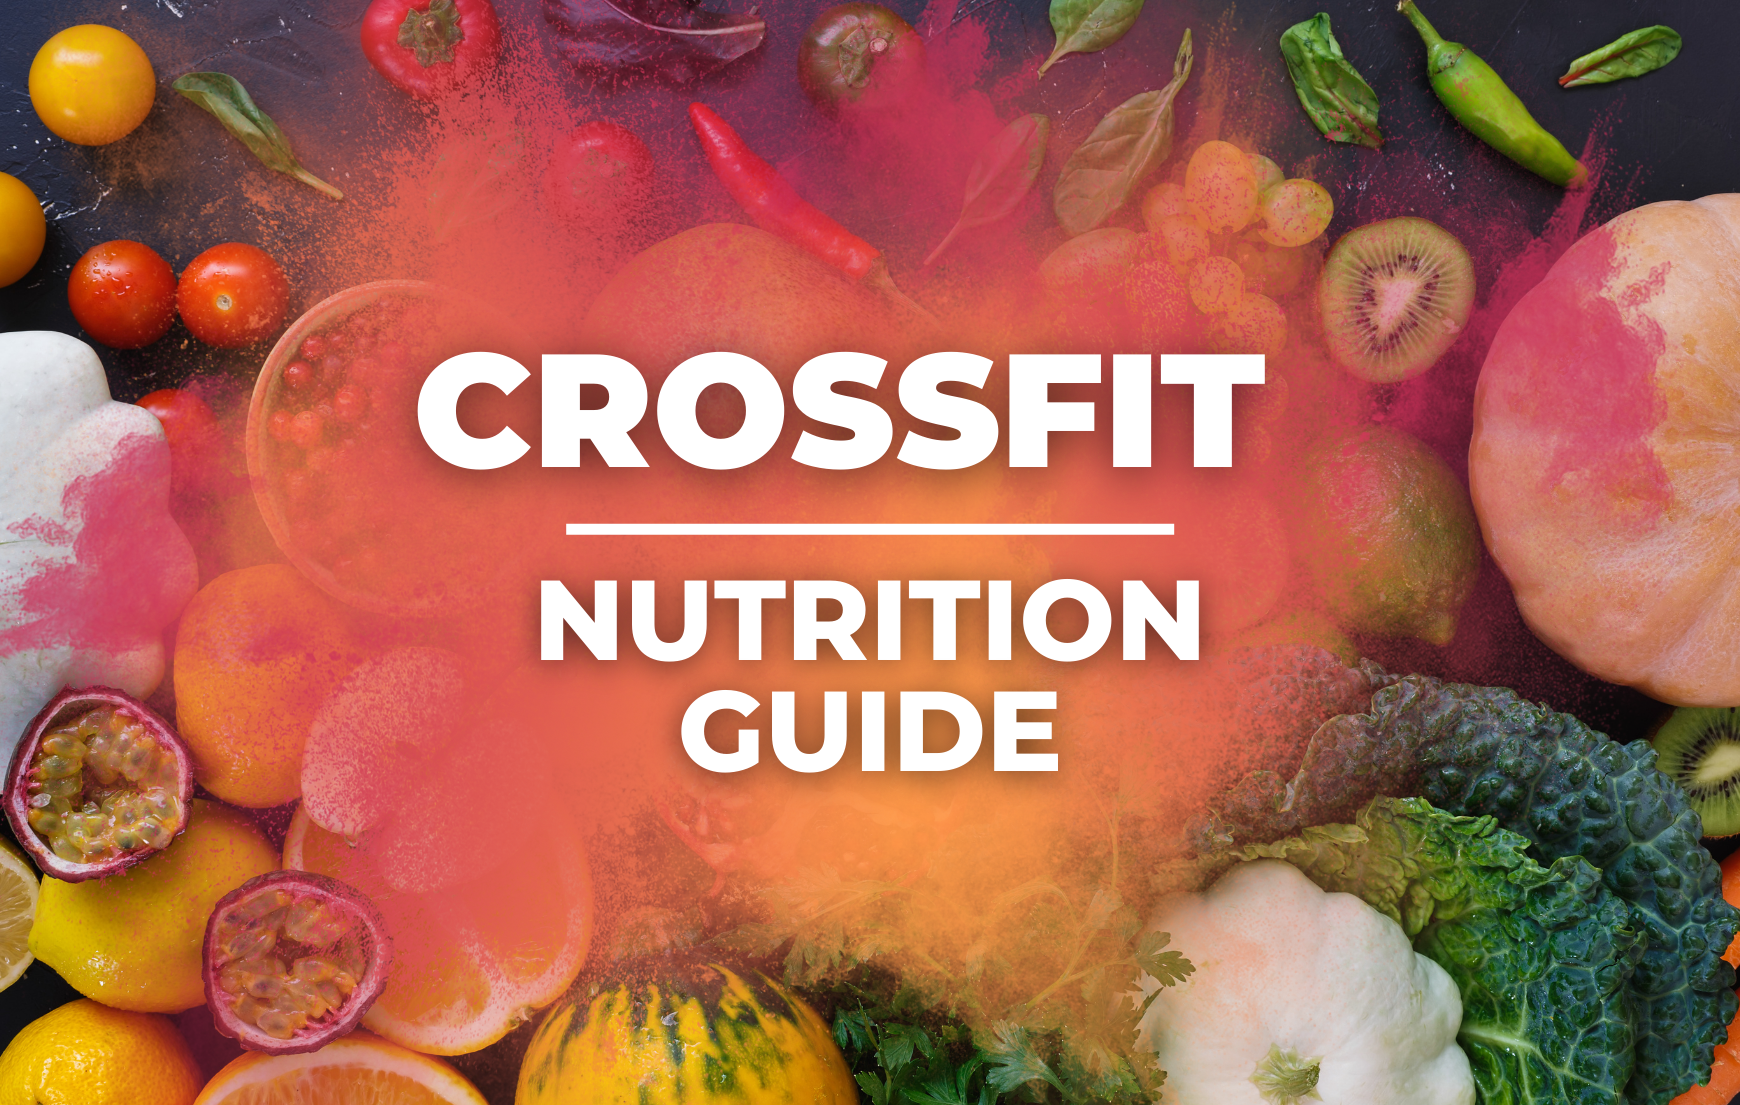 CROSSFIT NUTRITION GUIDE